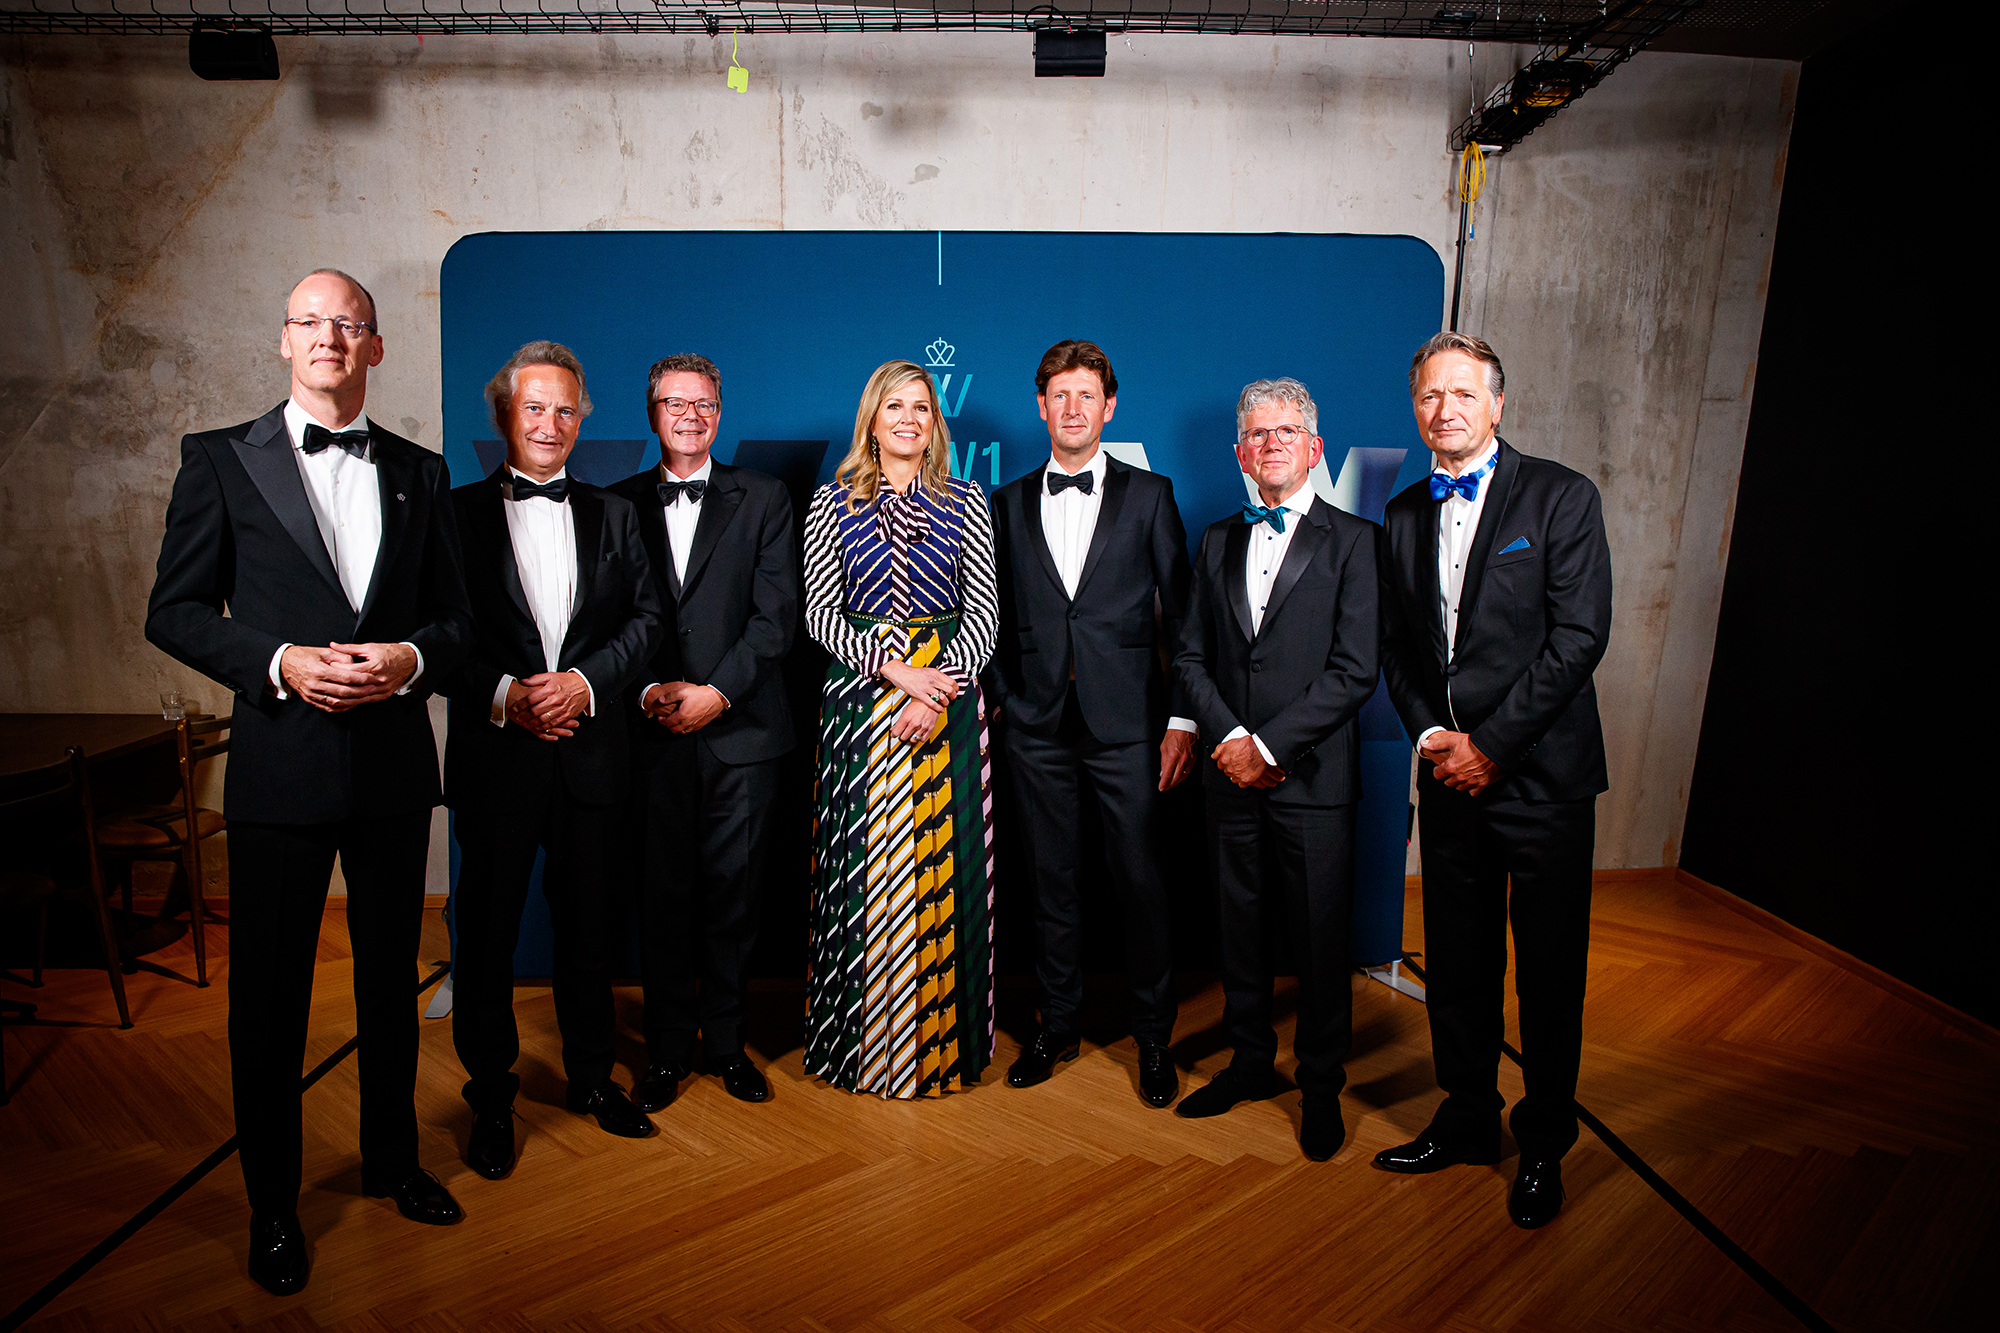 NXP wins the 'Oscar of the Dutch business world' with the Koning Willem I award